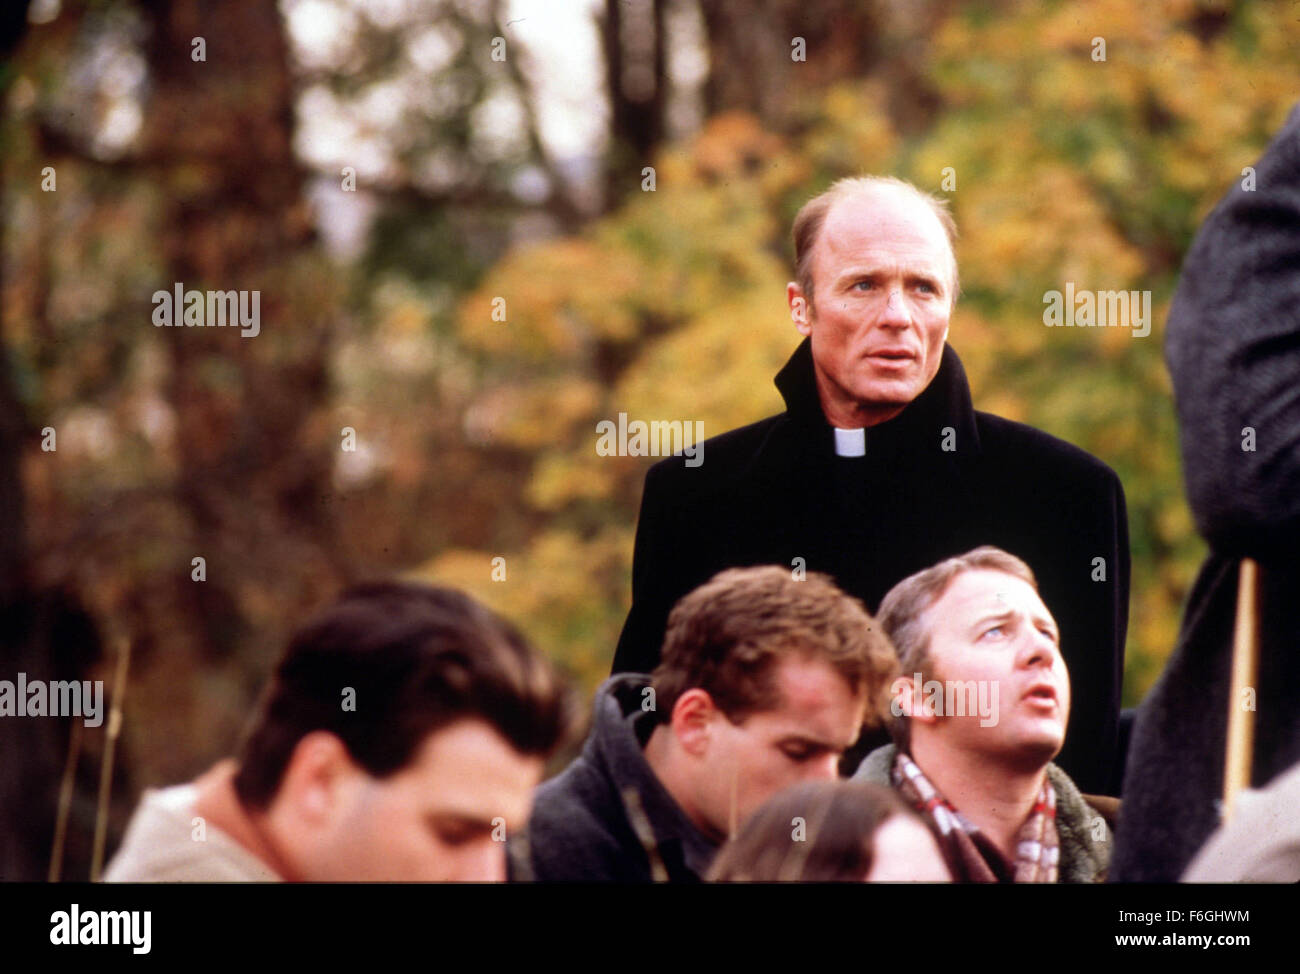 Feb 25, 2000; Hollywood, CA, USA; ED HARRIS stars in 2000 movie 'The Third Miracle' as a doubting priest who is hired by the Vatican to investigate the veracity of alleged miracles. In the process, he falls in love. Stock Photo